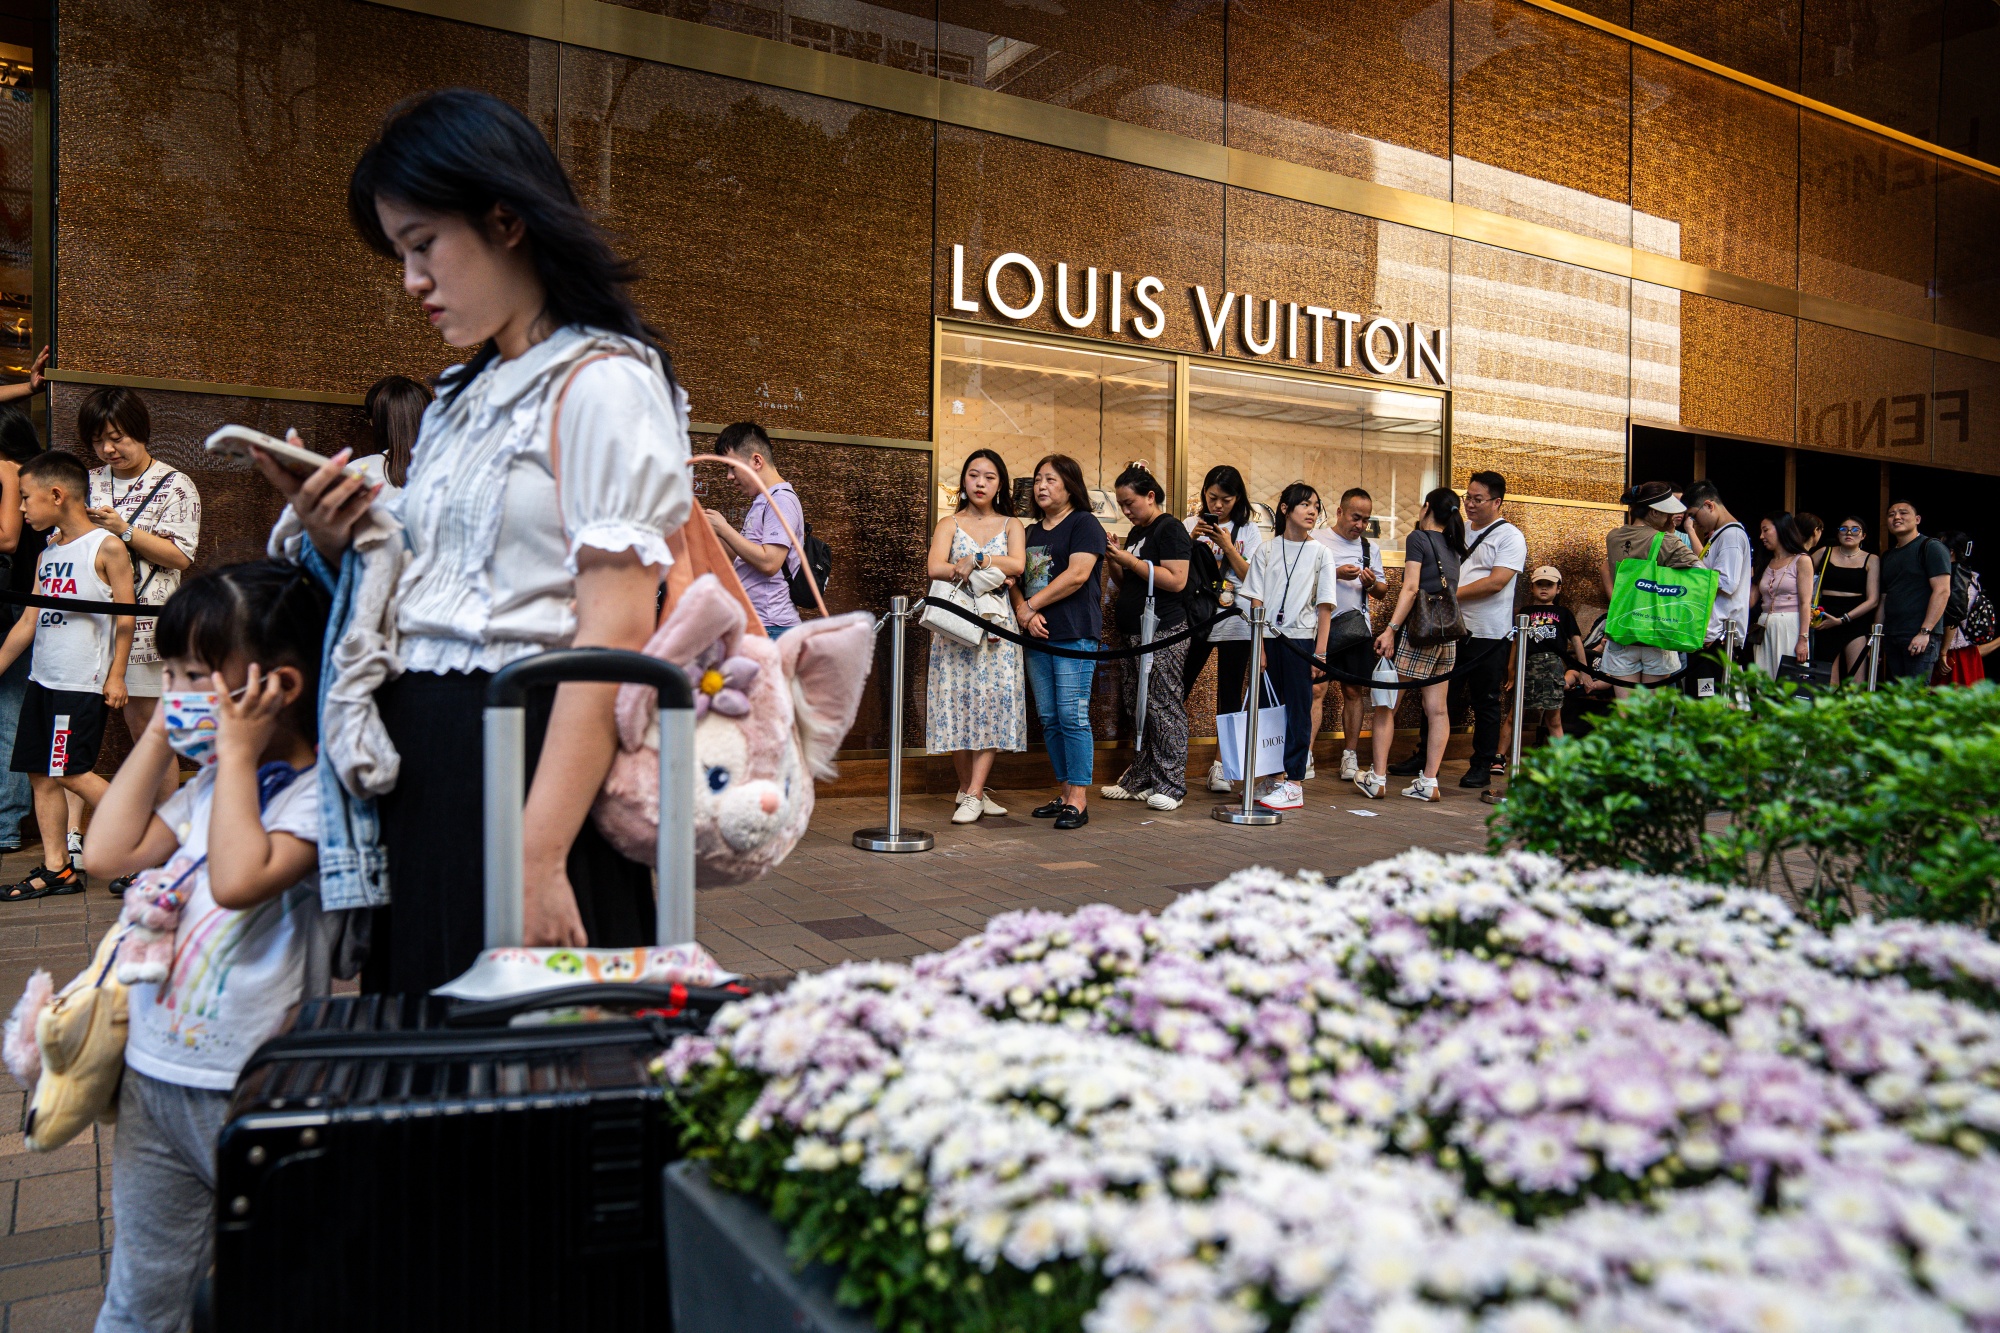 LVMH: you never stop growing